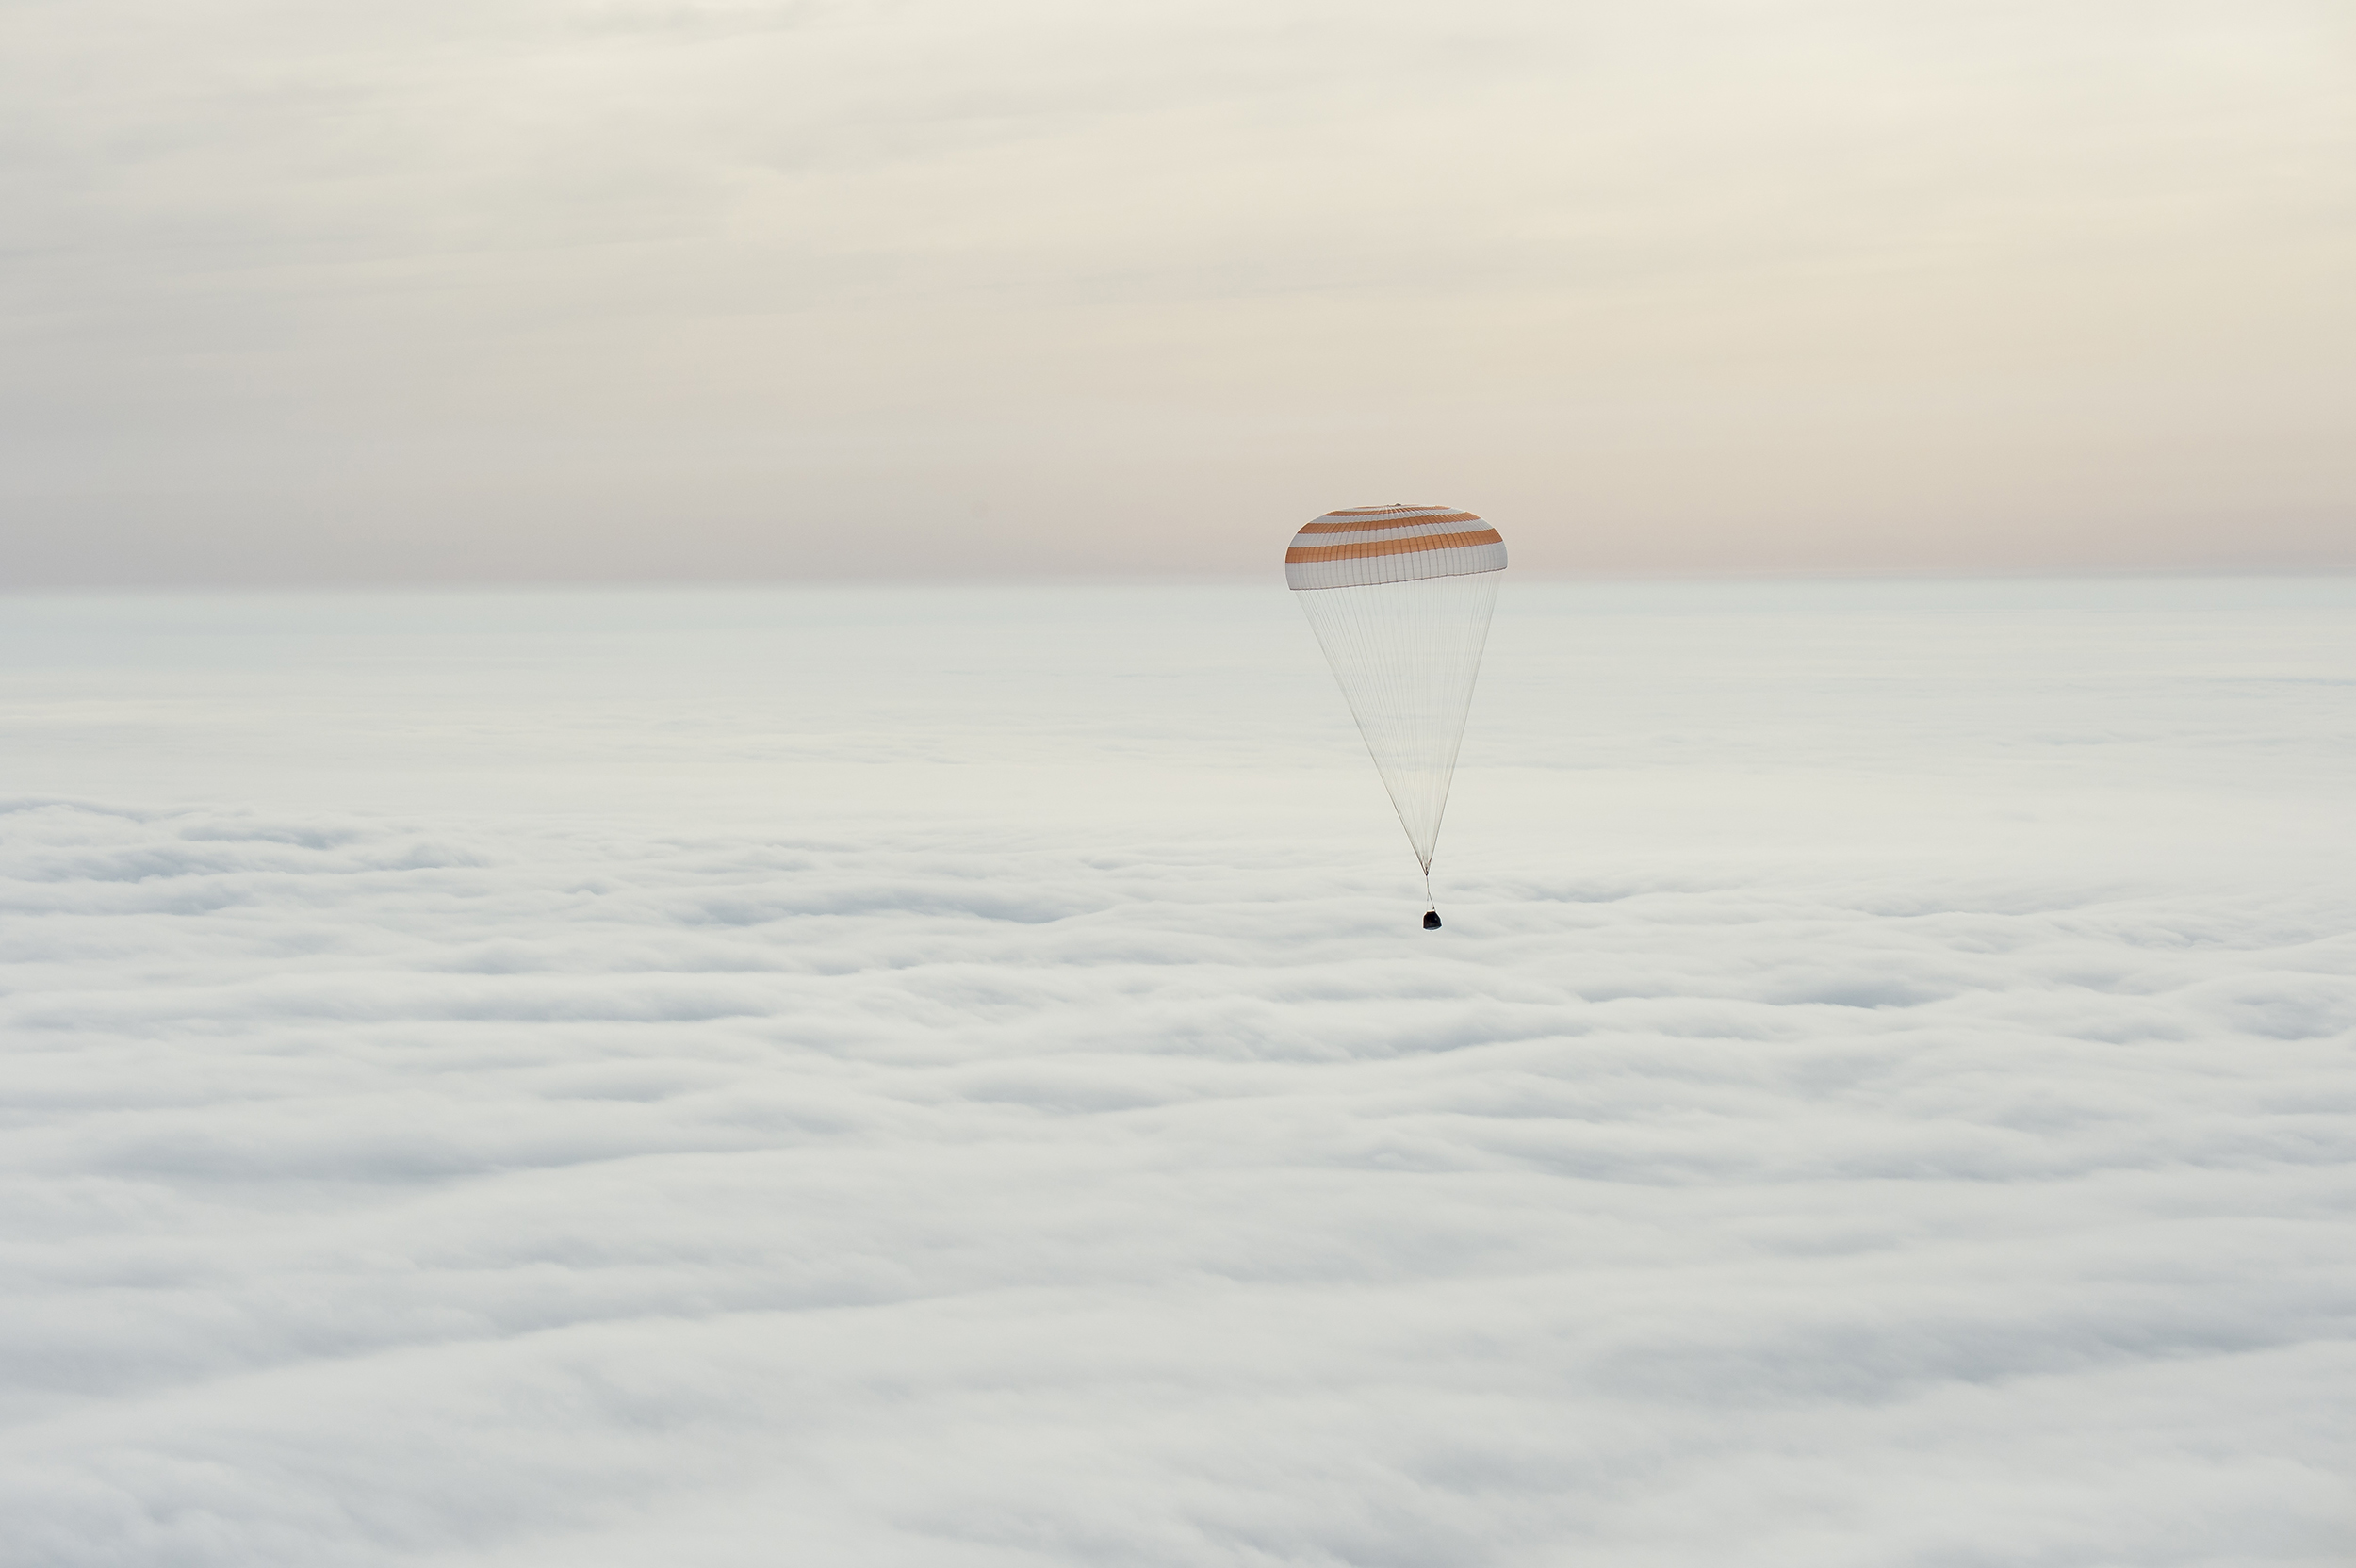 The Soyuz TMA-18M spacecraft is seen as it lands with Expedition 46 Commander Scott Kelly of NASA and Russian cosmonauts Mikhail Kornienko and Sergey Volkov of Roscosmos near the town of Zhezkazgan, Kazakhstan on March 2, 2016